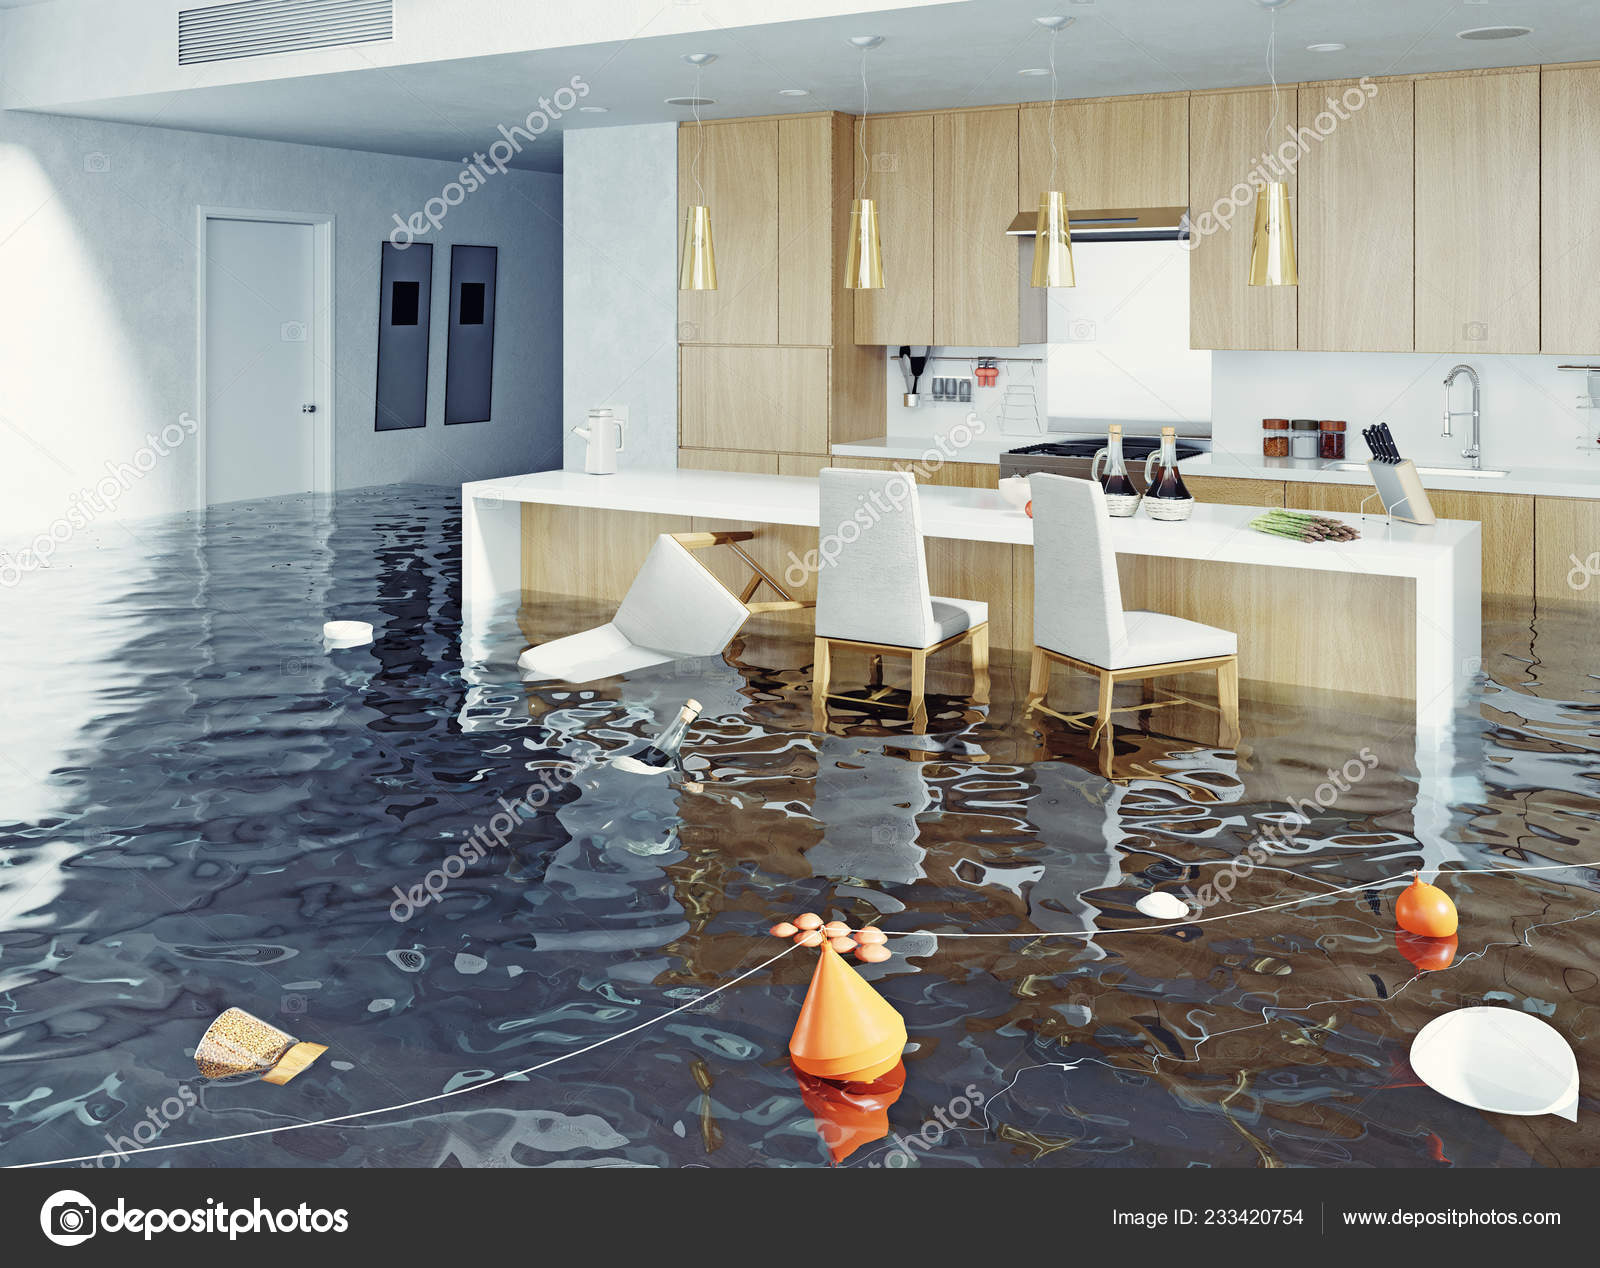 Flooding Kitchen Interior Rendering Concept Stock Photo by ©vicnt2815 ...